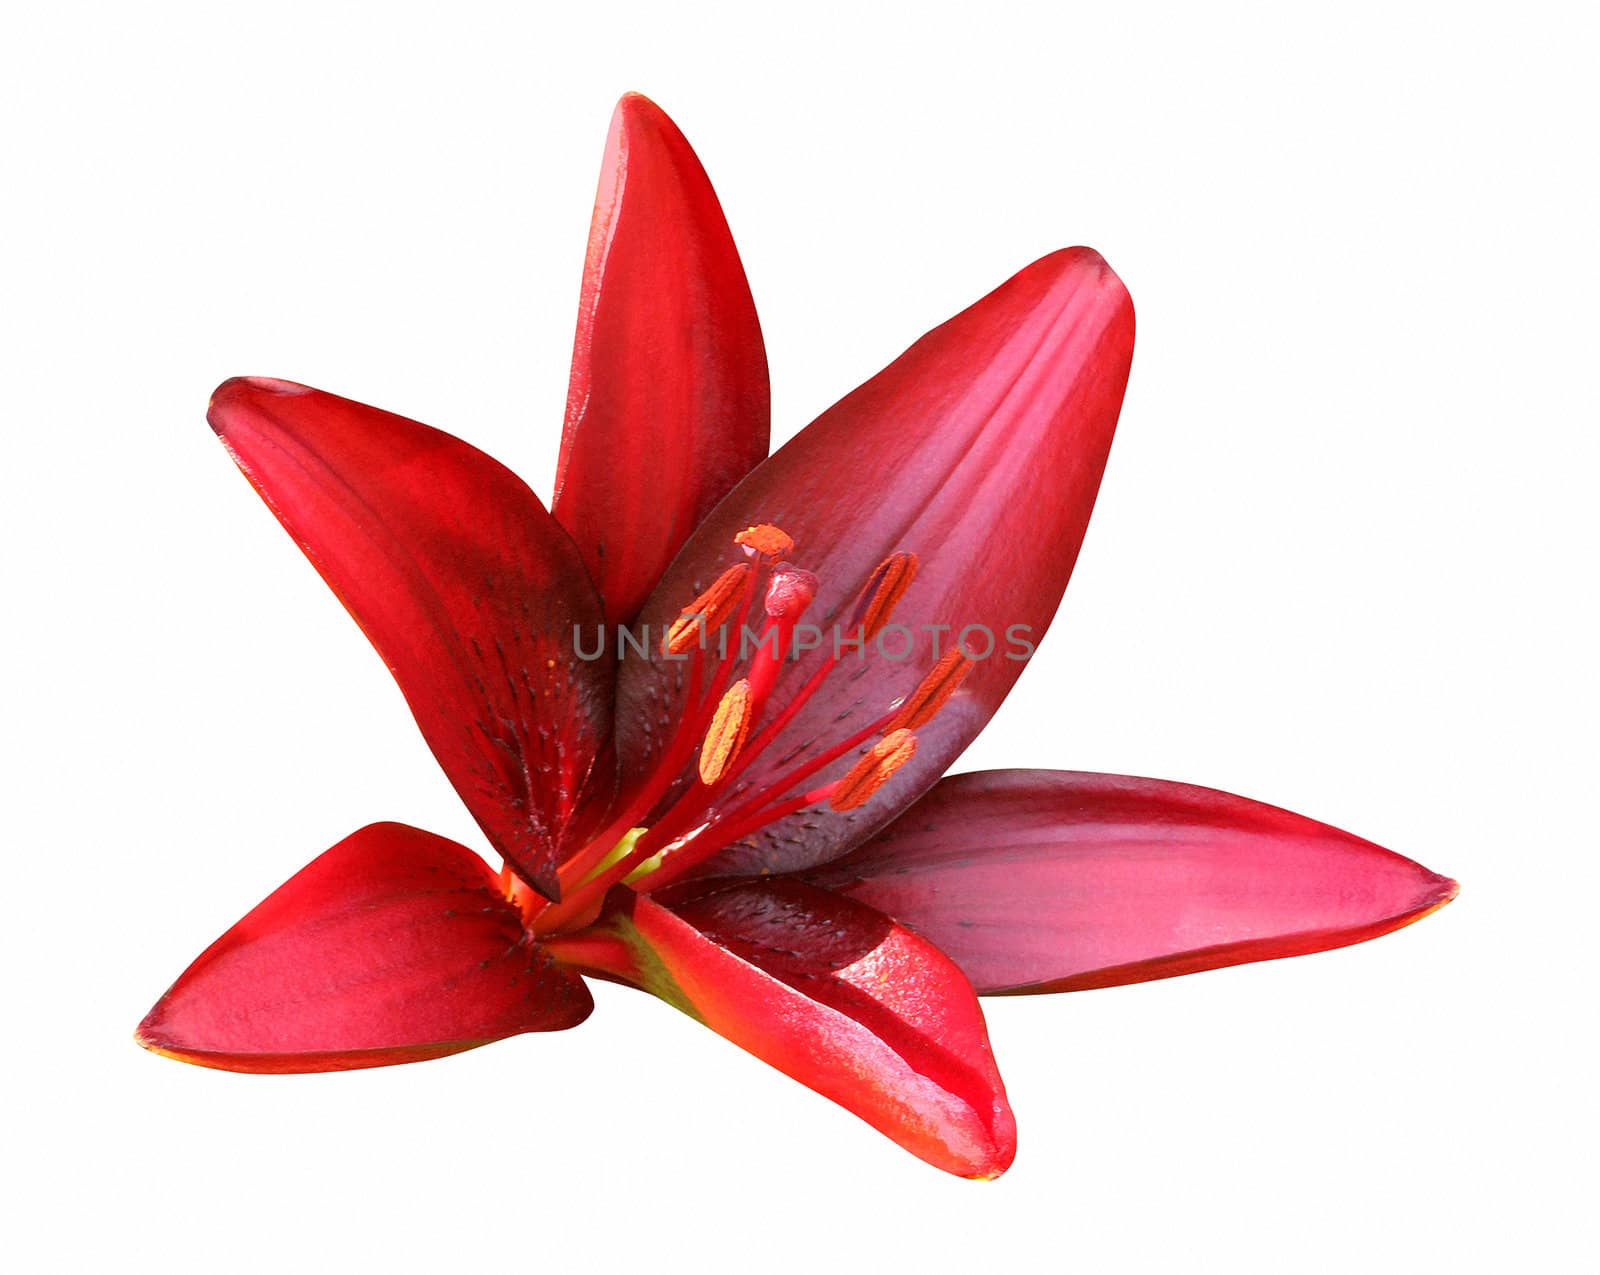 Red Lily, isolated on white background by zeffss